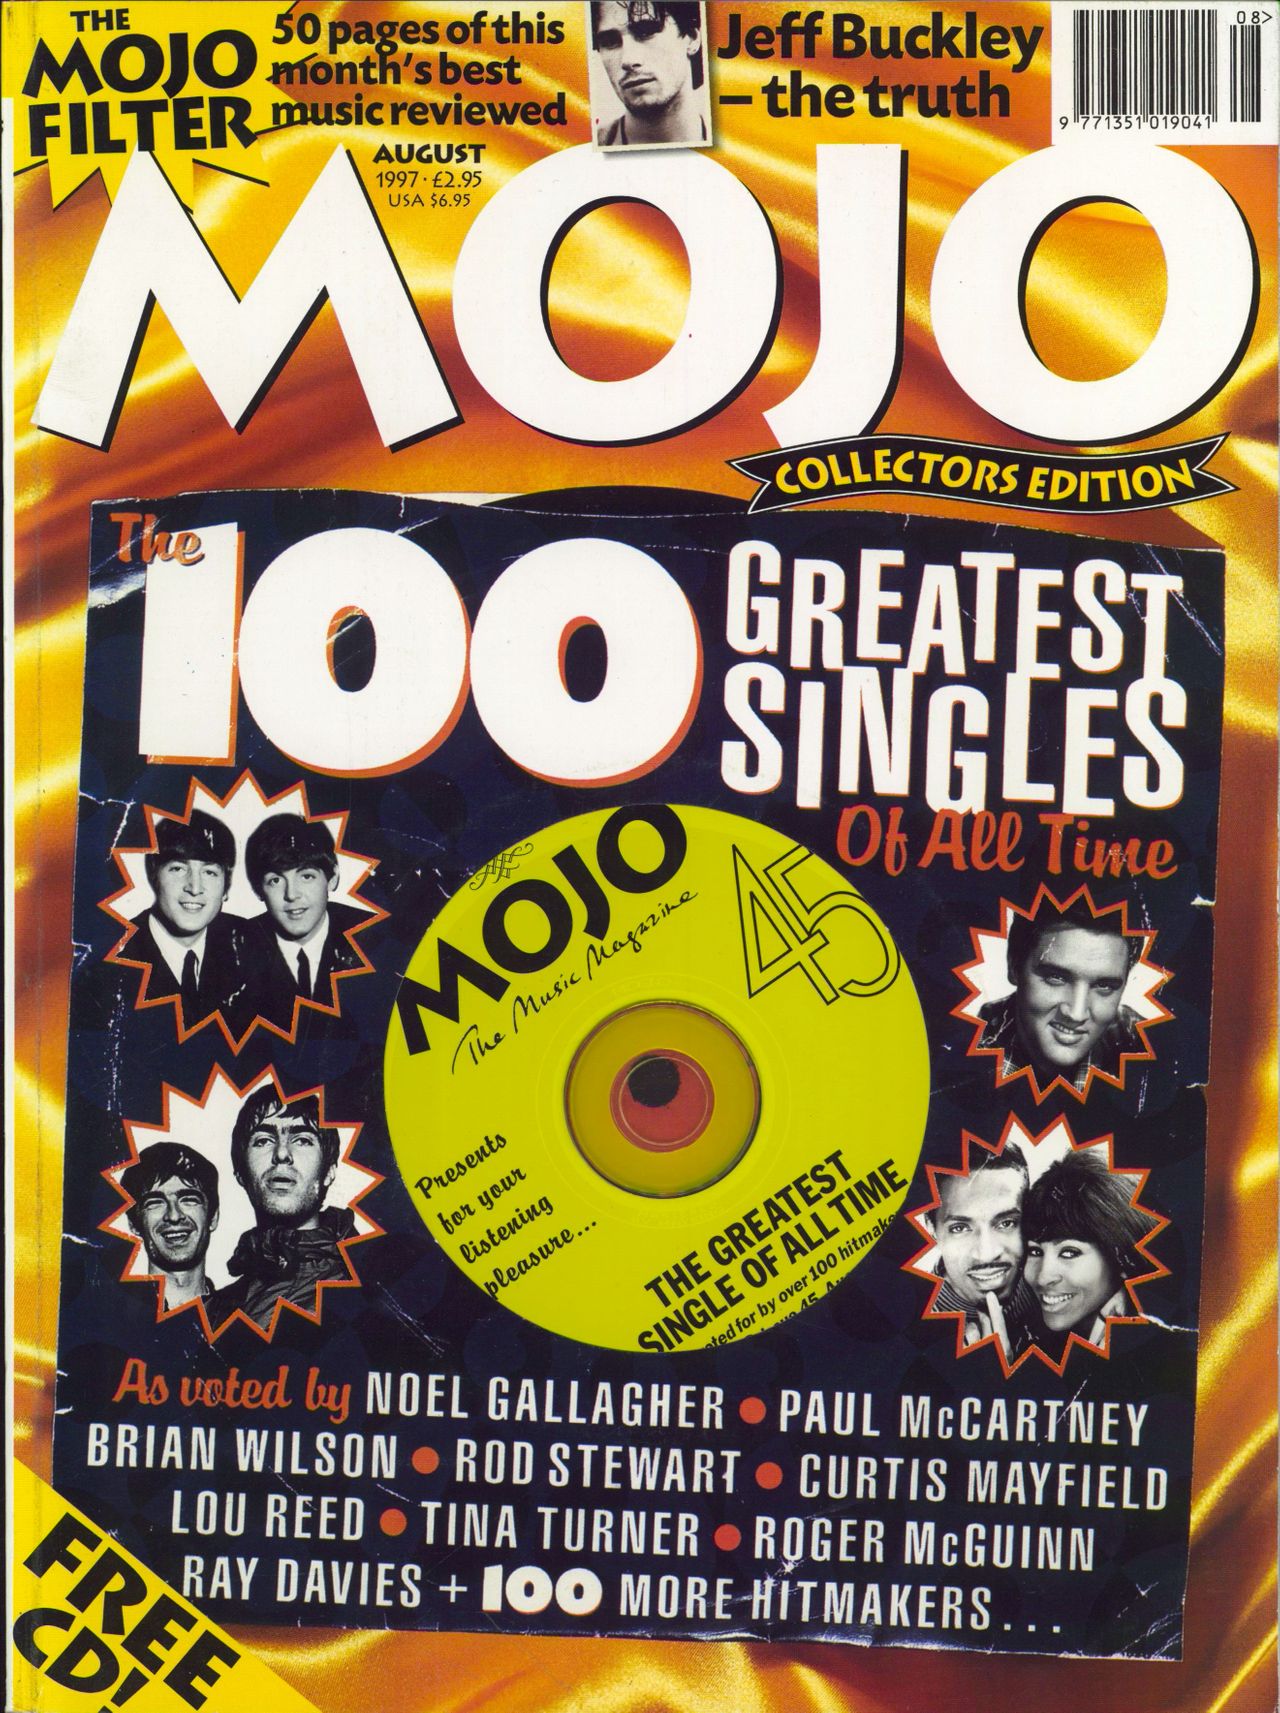 Mojo Magazine Mojo Issue 45 + The Greatest Single Of All Time CD UK magazine AUGUST 1997